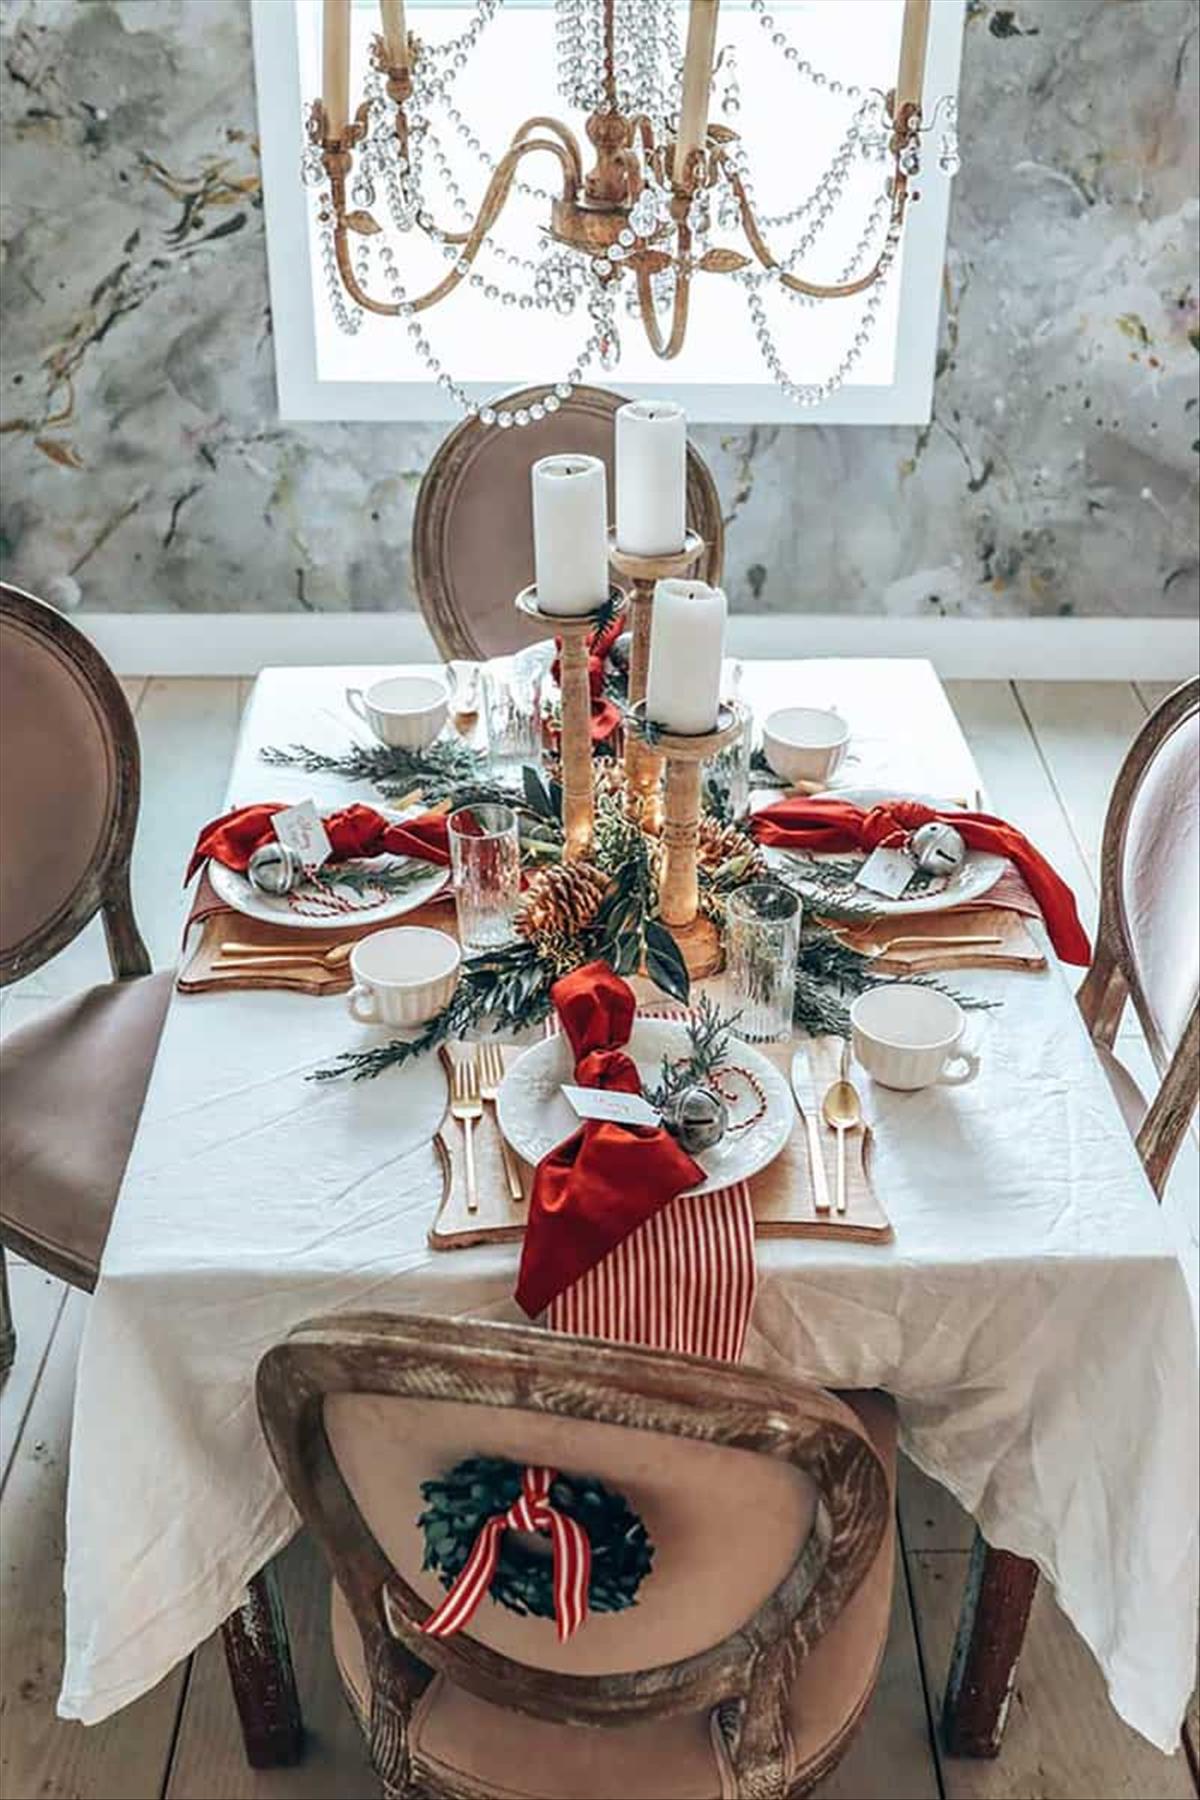 Vintage Christmas table setting and decoration ideas for 2022